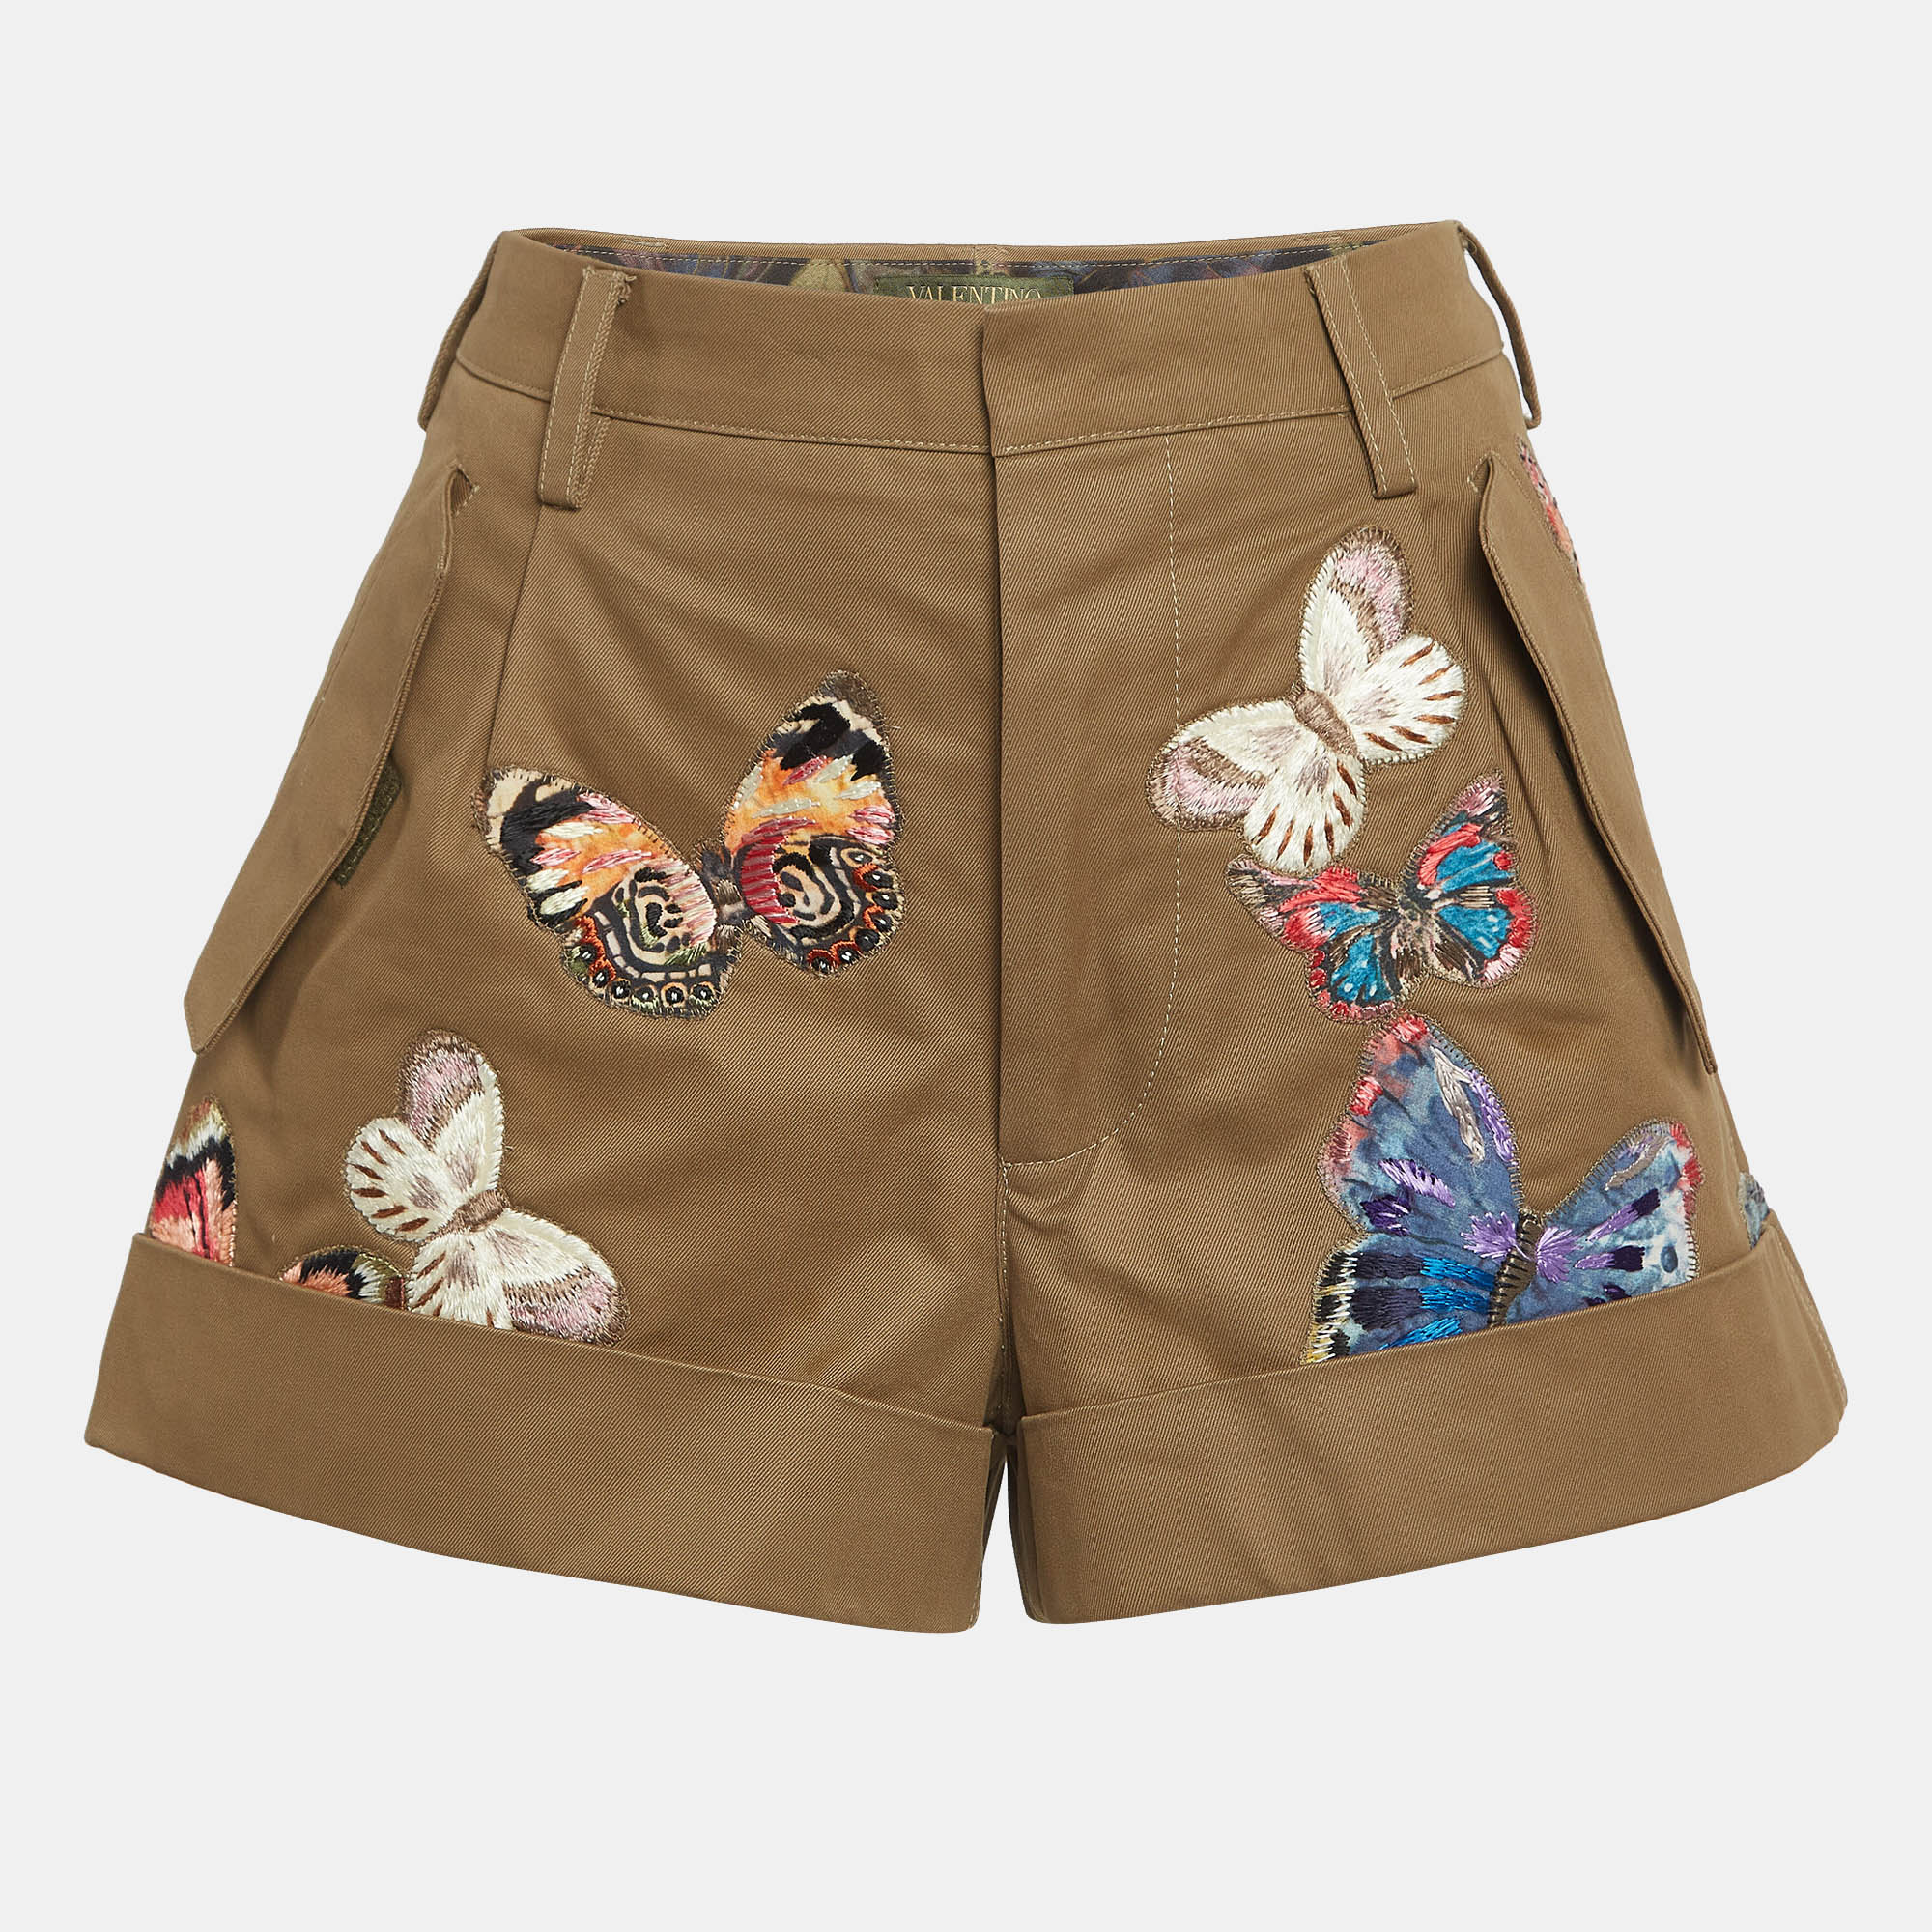 Valentino green embroidered cotton shorts s